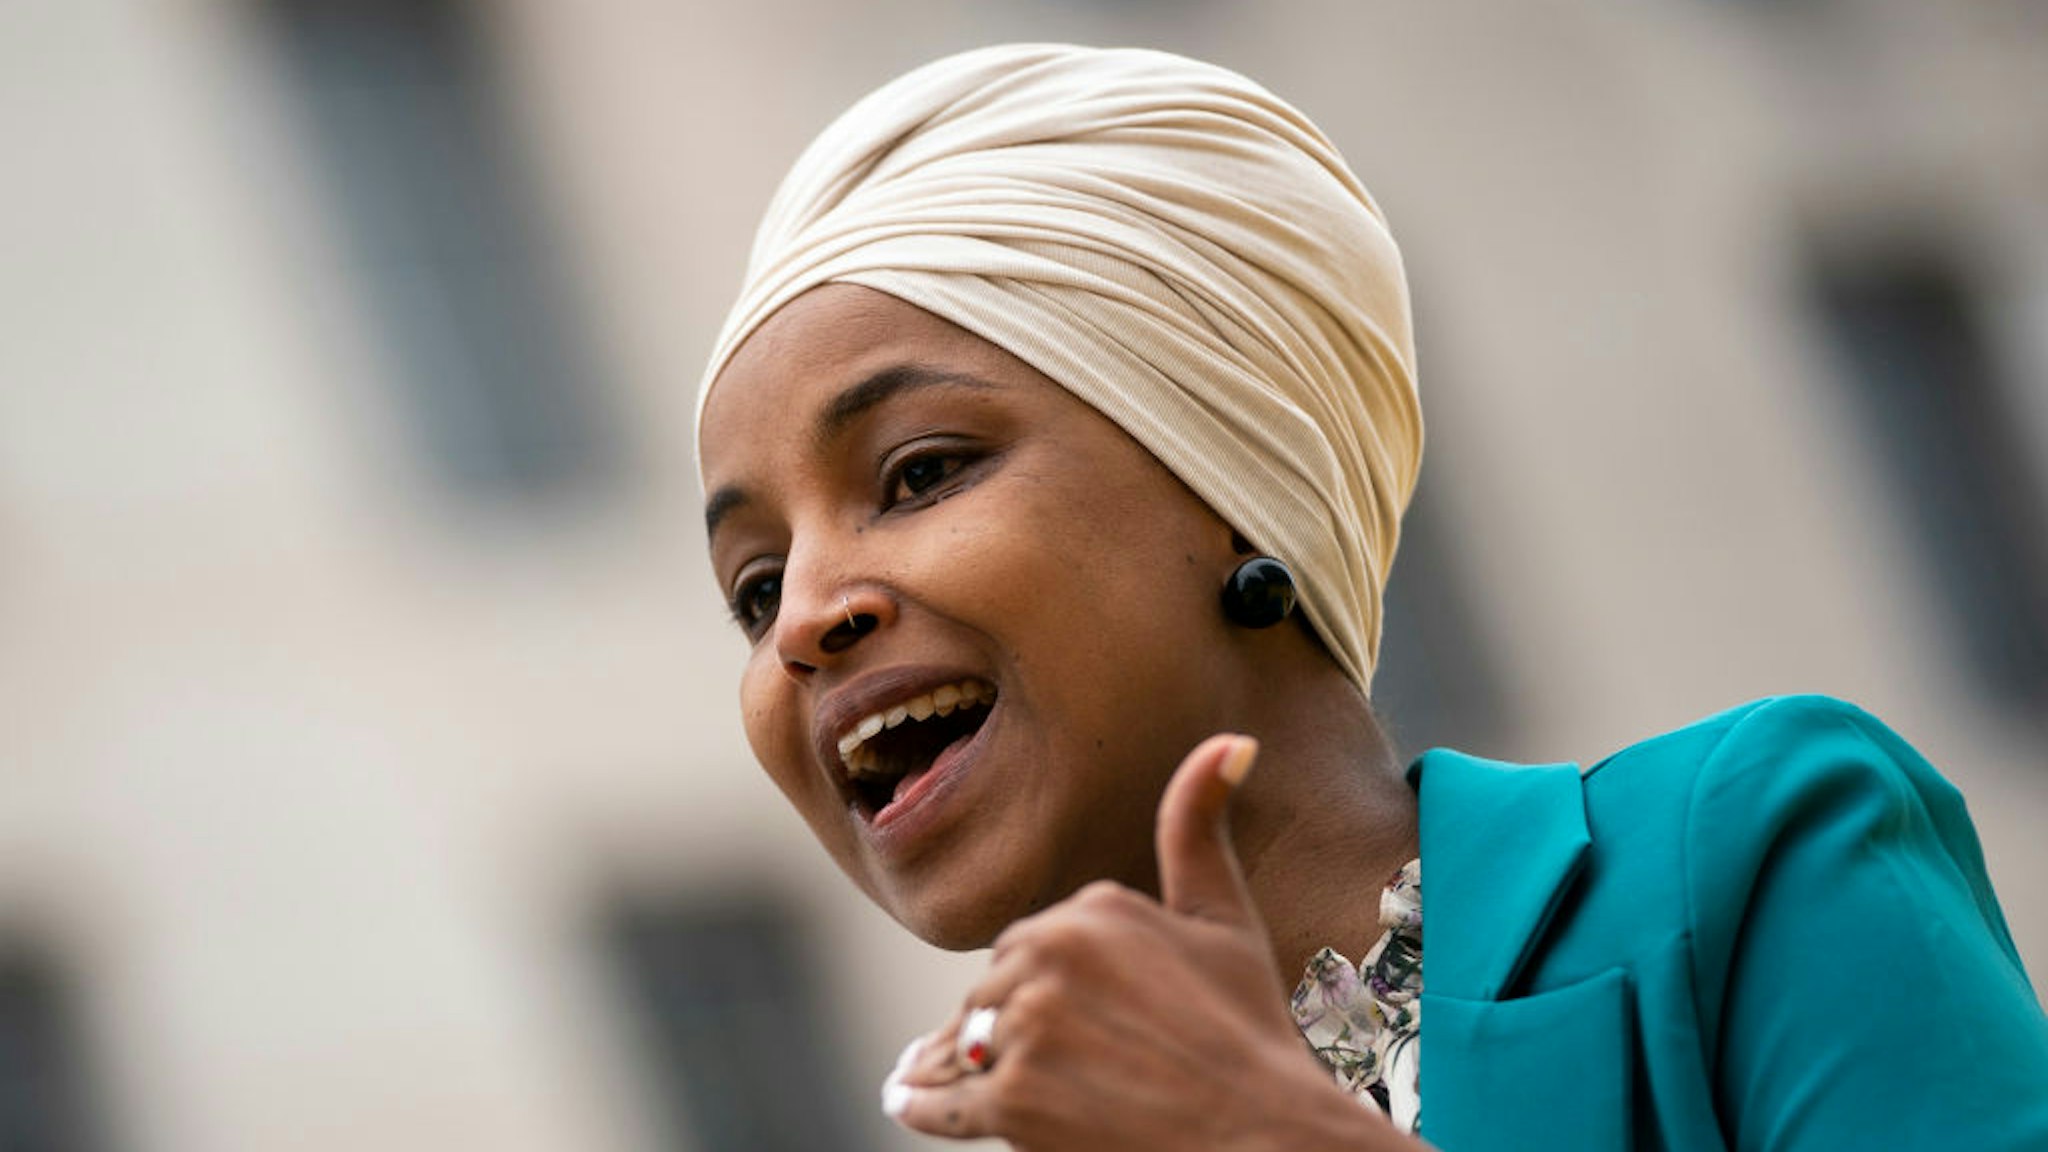 WASHINGTON, DC - APRIL 9: Rep. Ilhan Omar (D-MN) speaks during a press conference at Black Lives Matter Plaza calling for an end to U.S. support for a Saudi Arabia-led blockade of Yemen on April 9, 2021 in Washington, DC. 26 year-old Iman Saleh is on her 12th day of a hunger strike for Yemen in Washington, DC. Millions of Yemenis, including children, are on the edge of famine, which some attribute partially to the blockade that has choked the delivery of food and fuel into the country. (Photo by Drew Angerer/Getty Images)